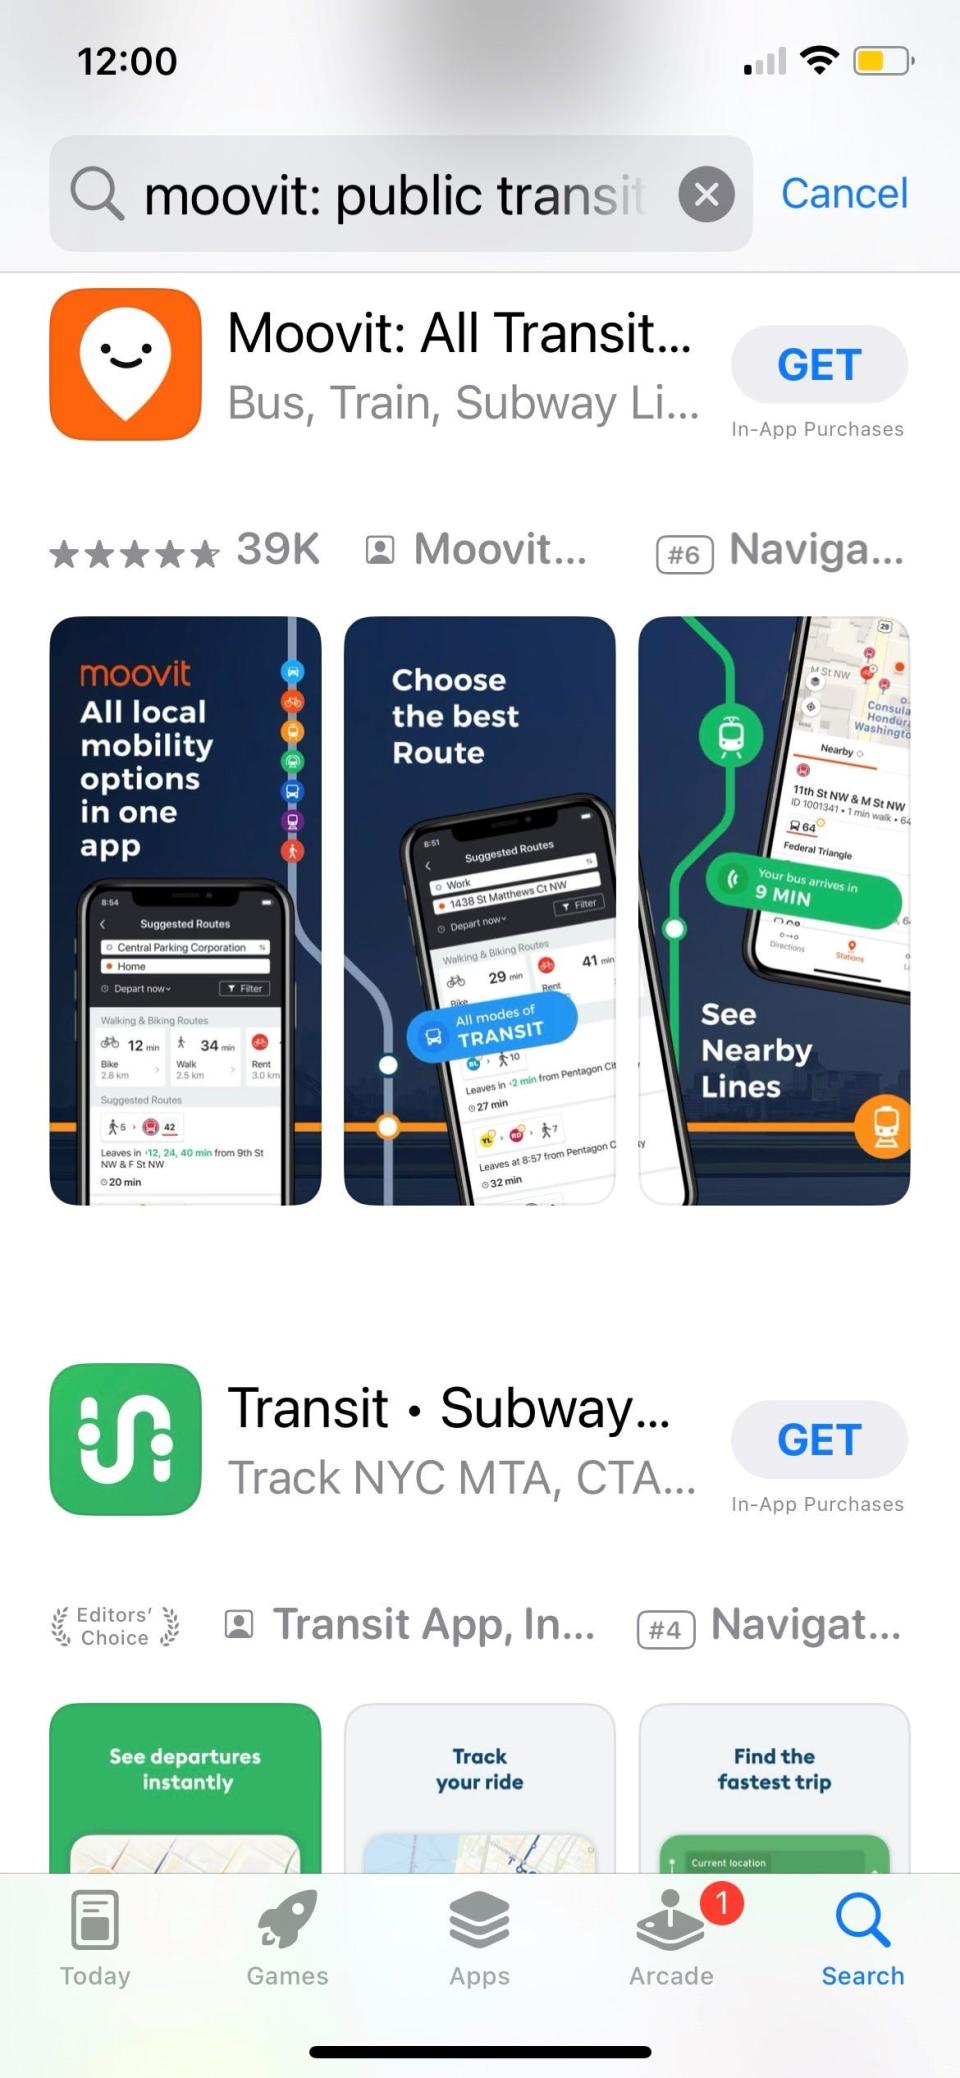 Many transit agencies around the world make their real-time data feeds available to the public, which allows third party transport app companies such as Google Maps, Transit, Moovit and Citymapper to show real-time departure information.